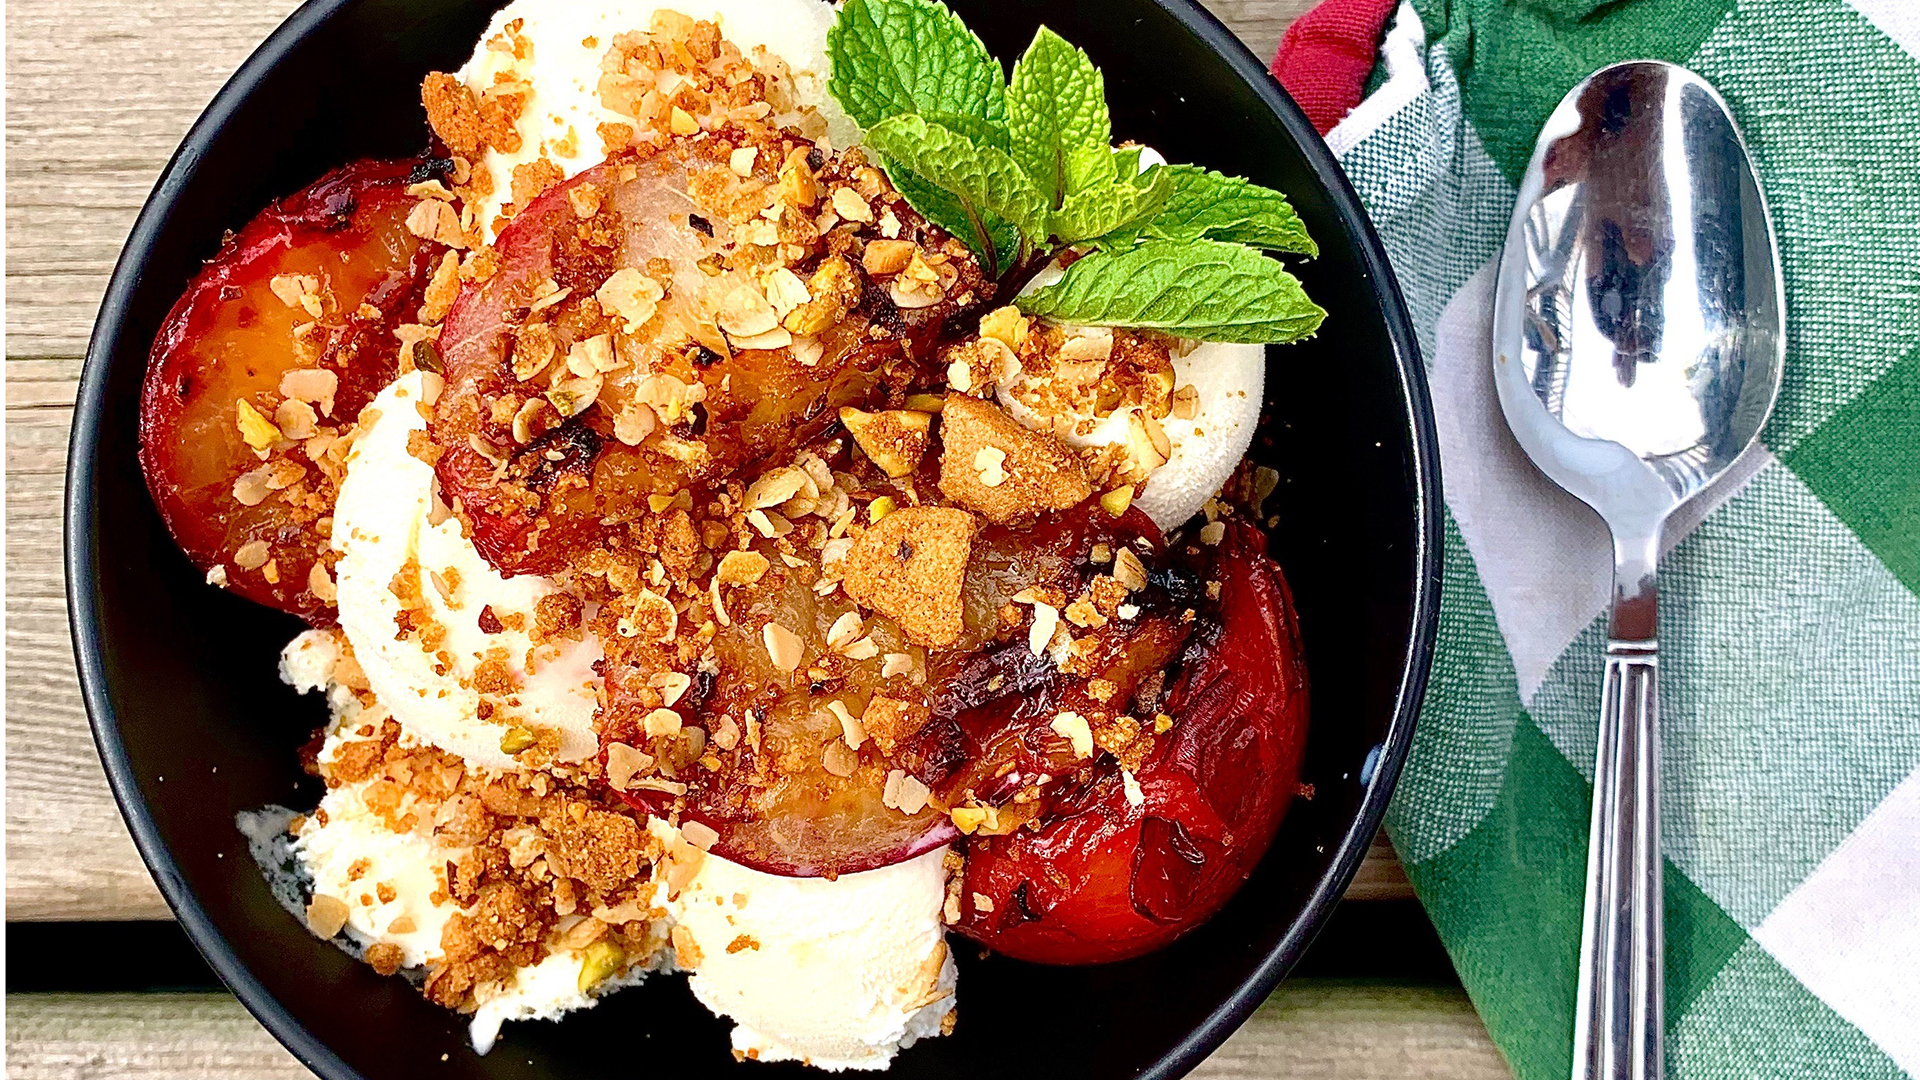 Grilled plum sundaes with a ginger pistachio crumble